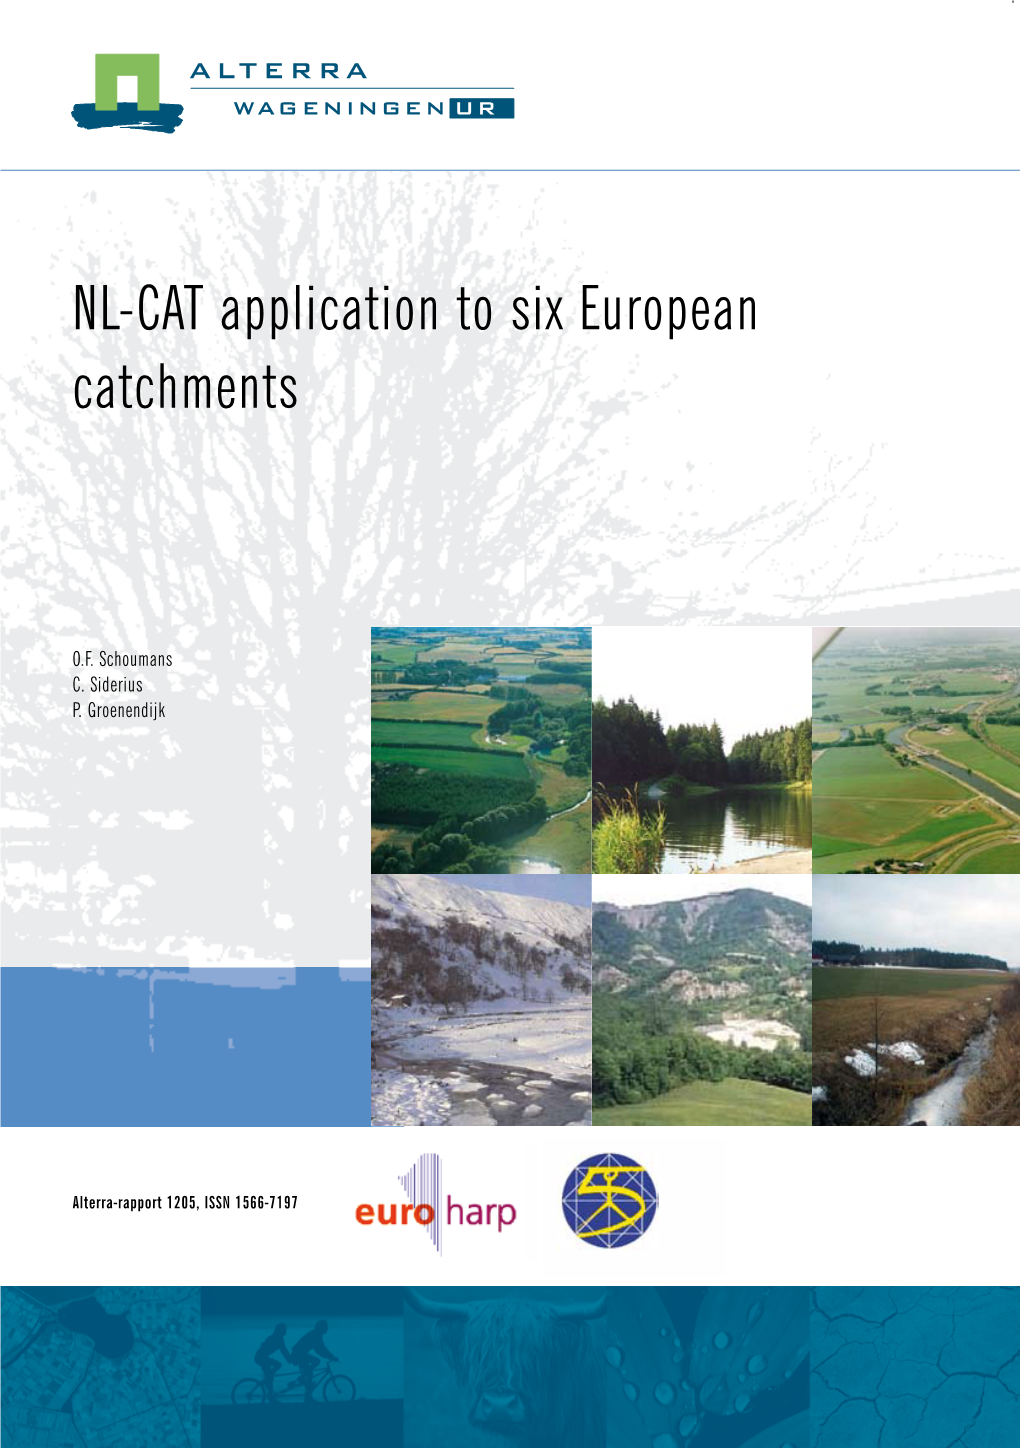 NL-CAT Application to Six European Catchments